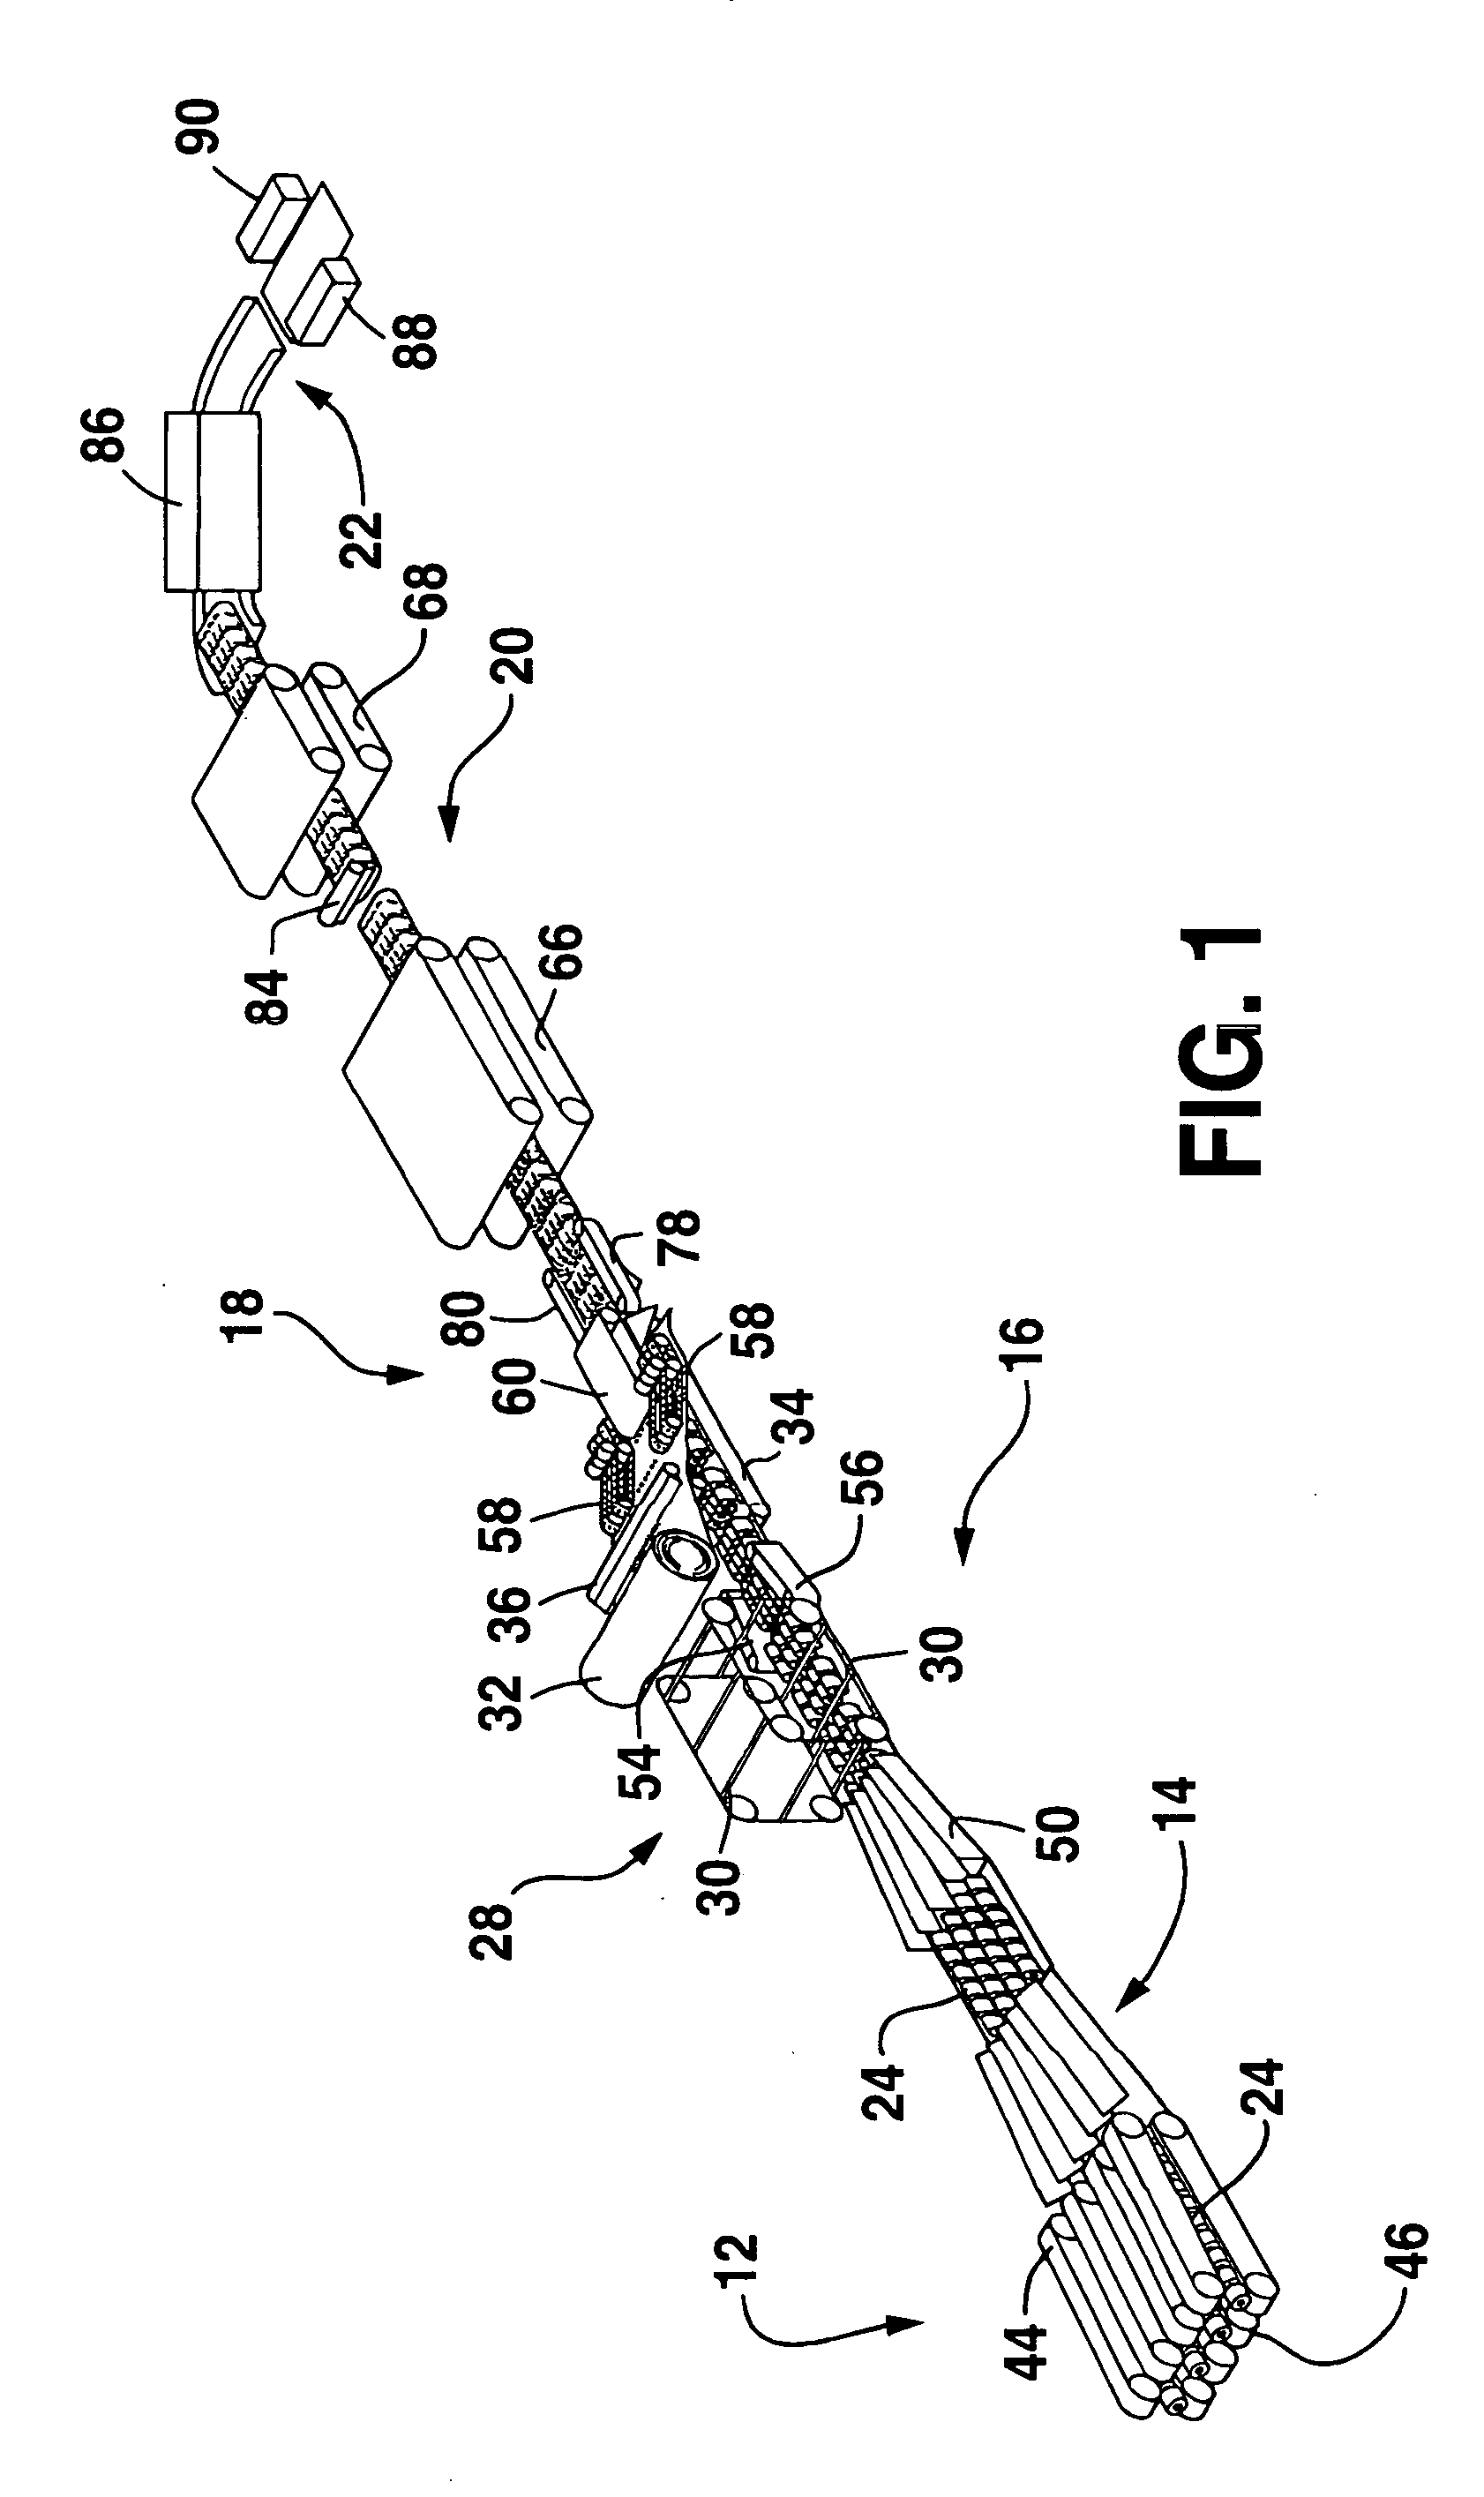 System and process for packaging products